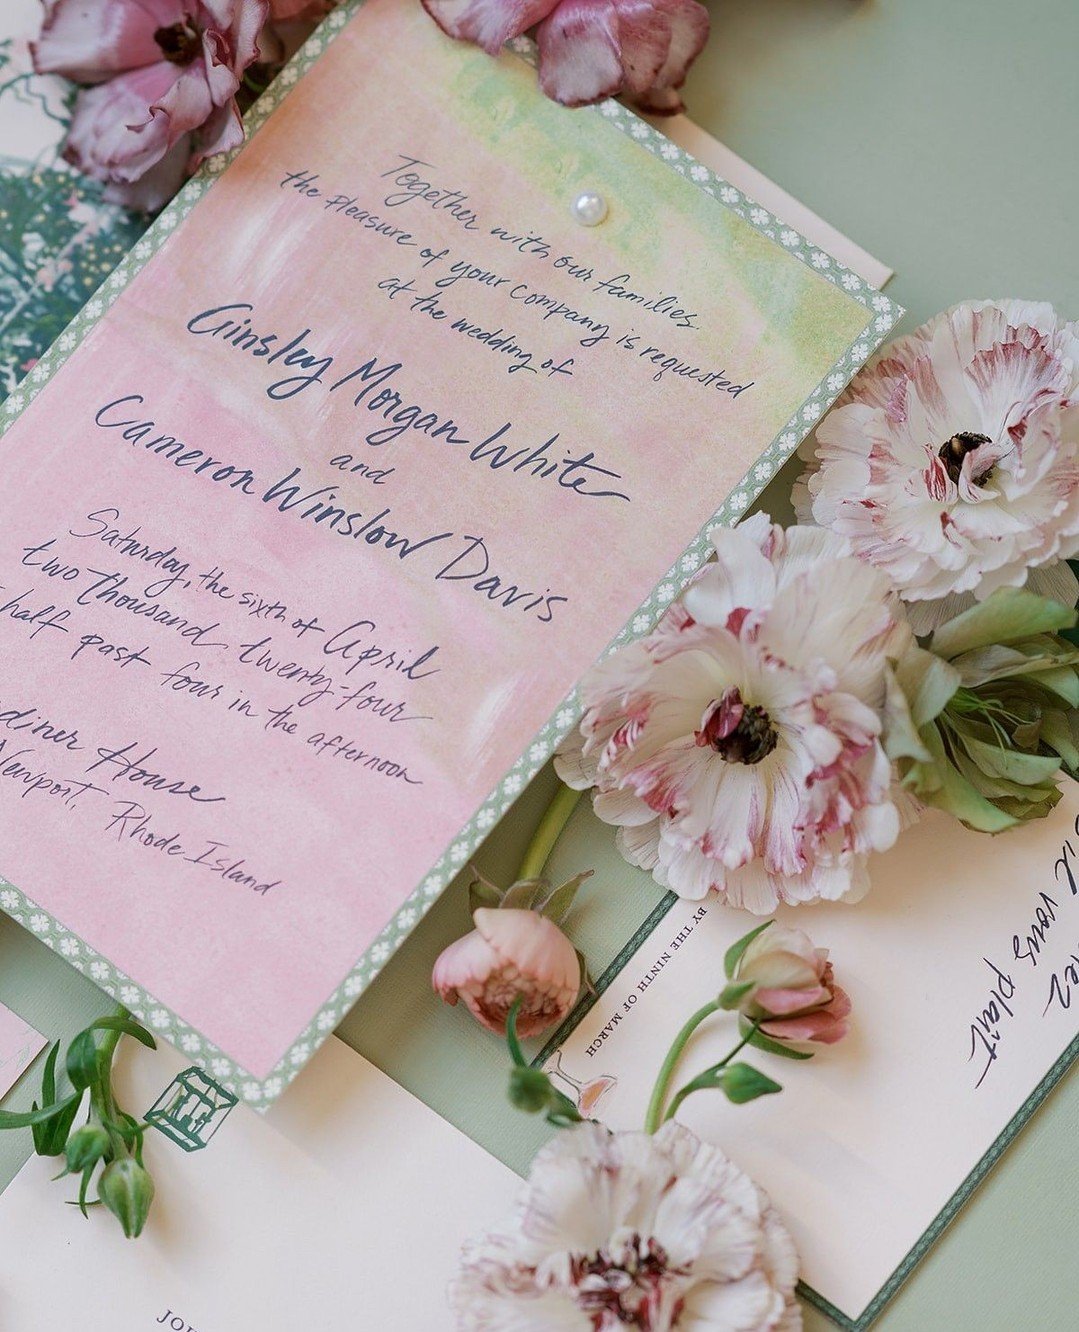 It's here! The Gardiner suite, the newest addition to The KFD Collection. This hand-calligraphed suite features whimsical watercolor portraits and pearl highlights. Customize the border, artwork, envelope colors, etc. We are SO smitten with this suit